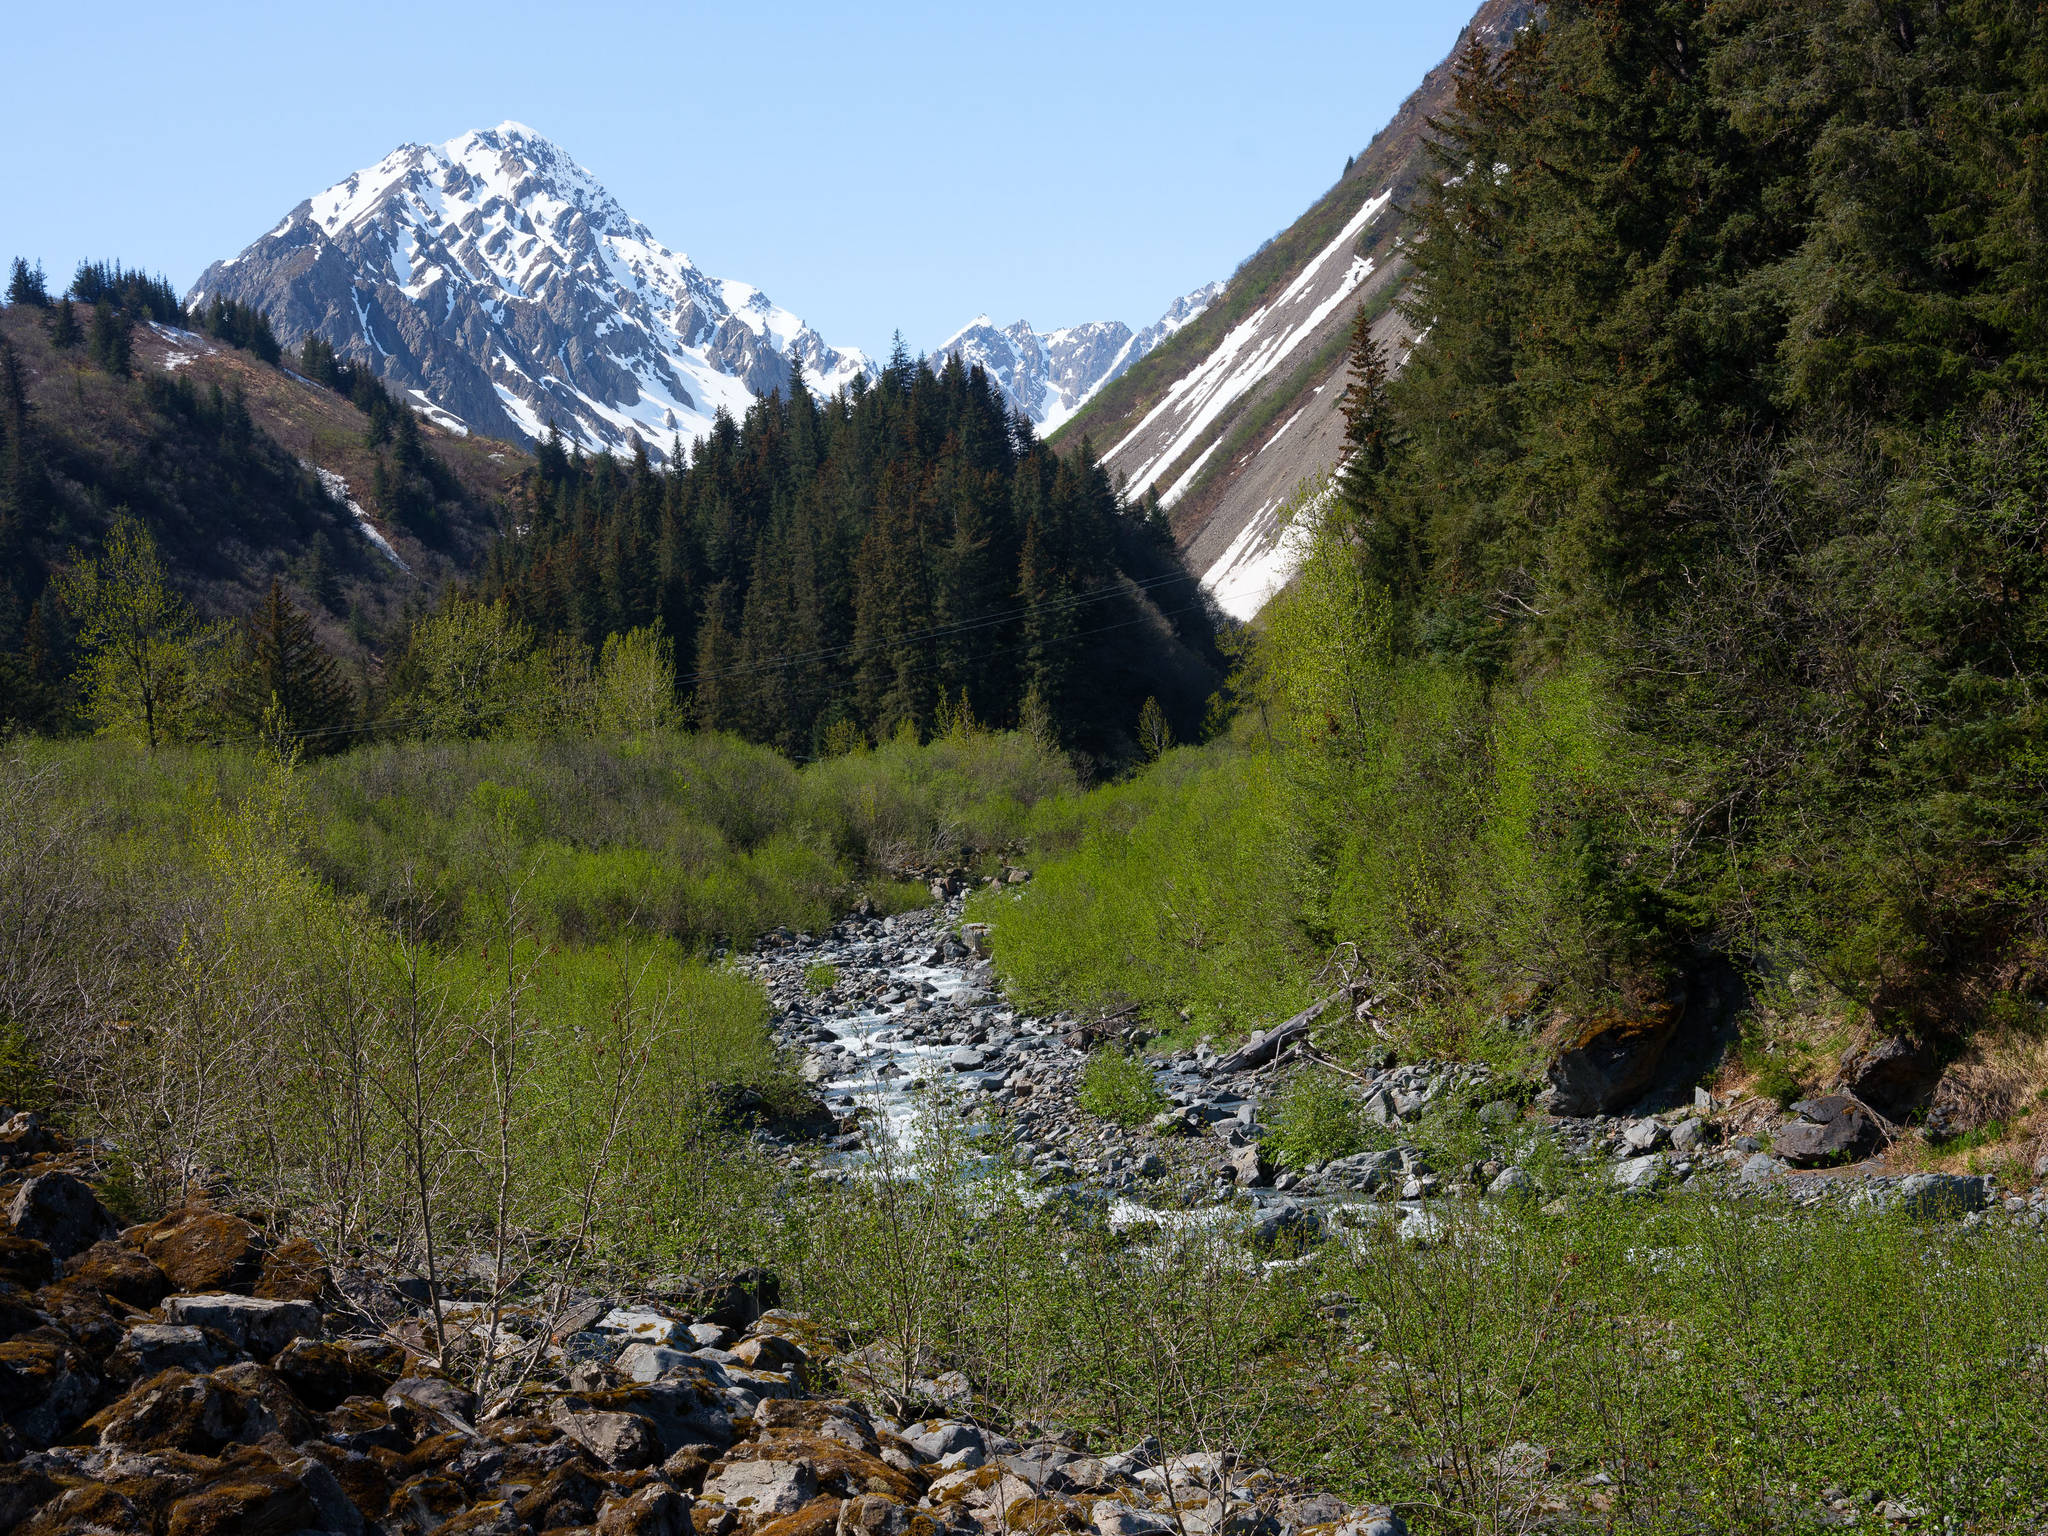 Japanese Creek, which begins at the foot of an alpine glacier in the Kenai Mountains, flows through a steep canyon before it runs along the northeast edge of Seward, Alaska. (Young Kim for The Hechinger Report)